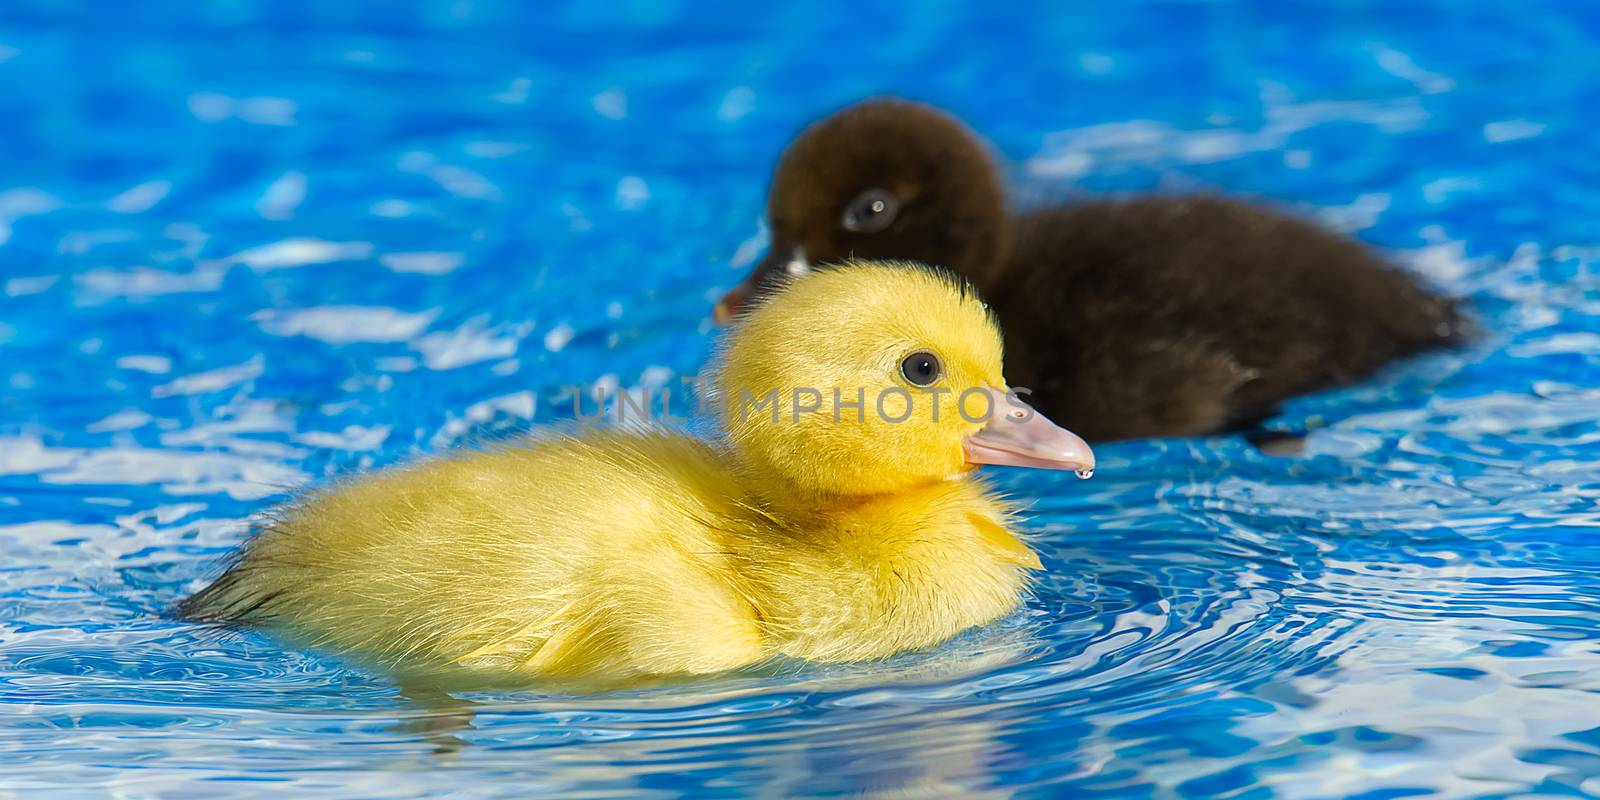 Yellow small cute duckling in swimming pool. Duckling swimming i by PhotoTime